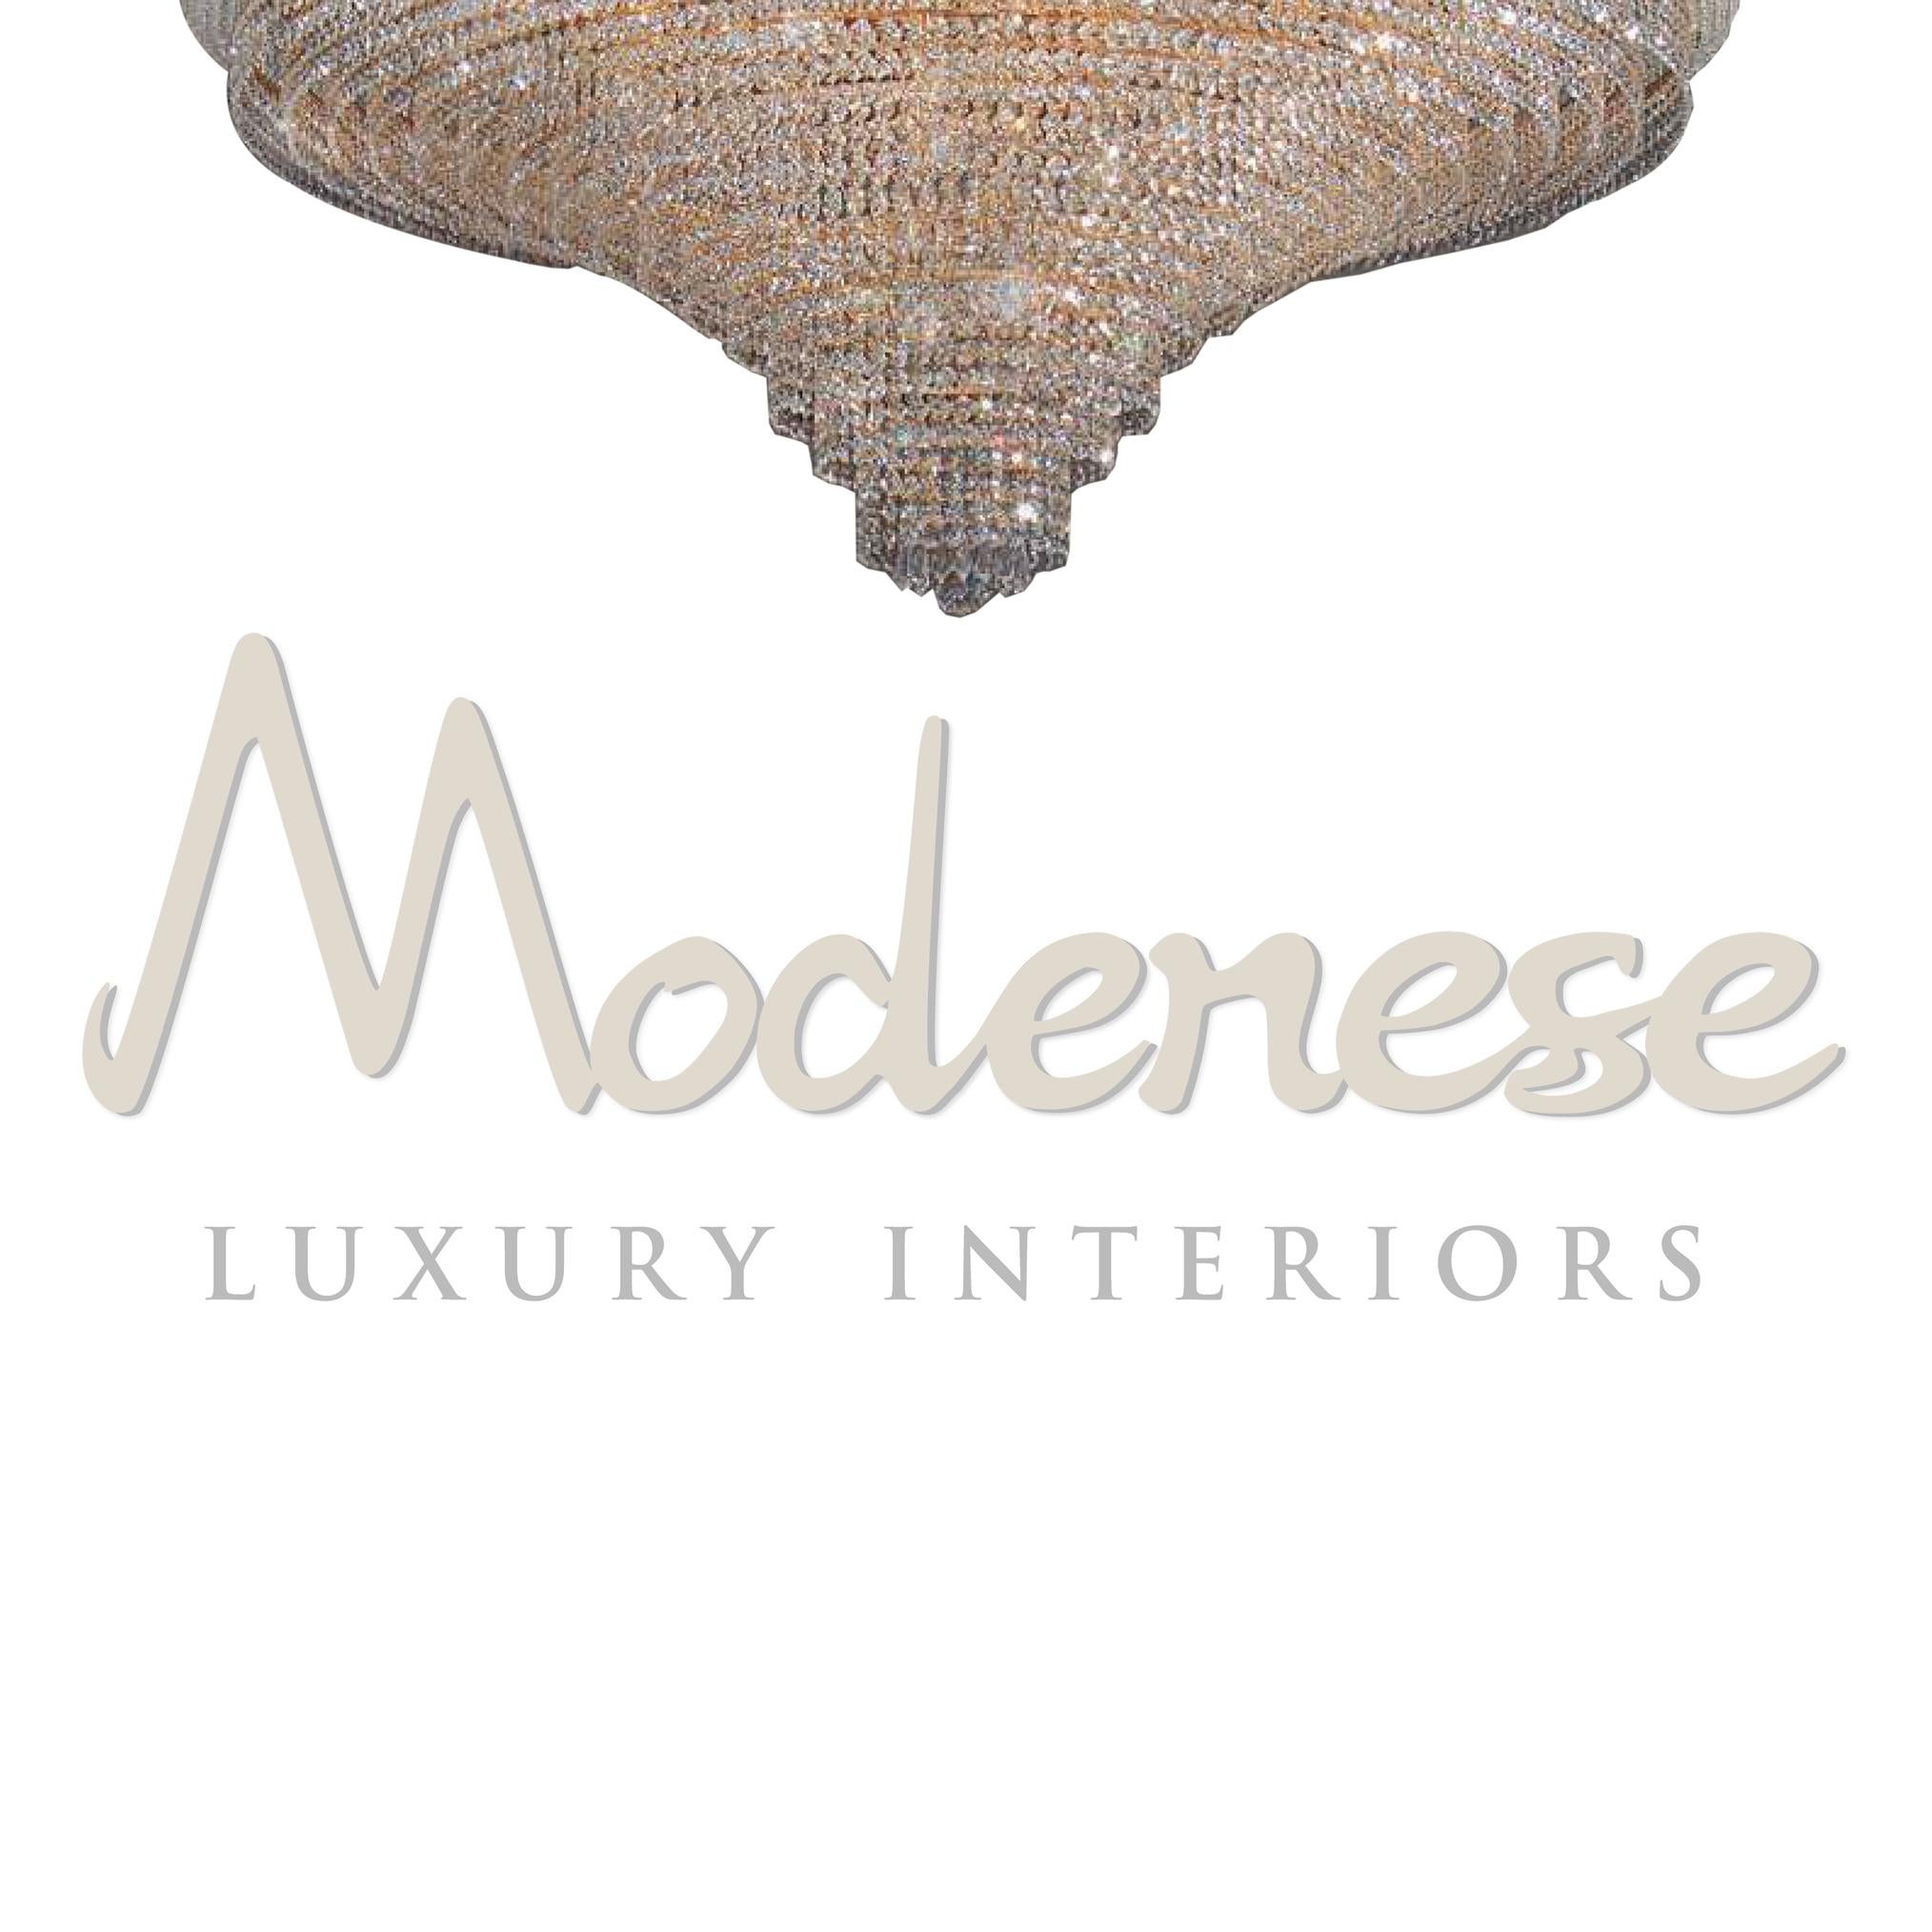 This Modenese Gastone Luxury Interiors ceiling lamp has a 24kt gold plated finishing and is equipped with beautiful scholer crystals. This model requires 18 single E14 screw fit light bulbs (60Watt max).
 